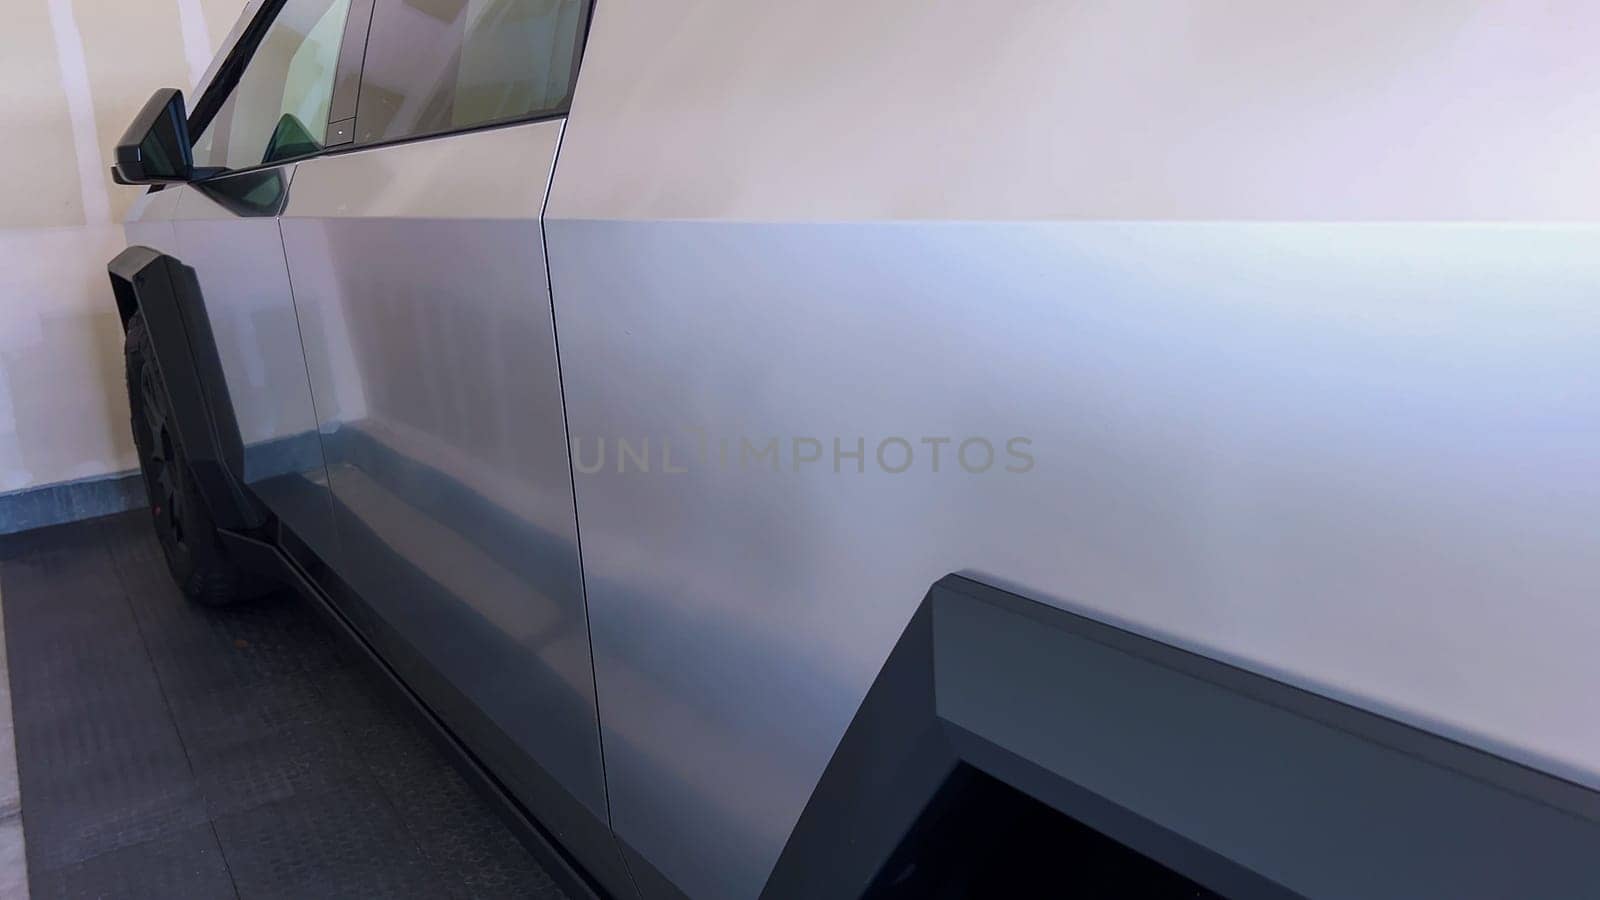 A close-up image emphasizing the sharp, angular design and textured metallic surface of the Tesla Cybertruck, showcasing the attention to detail in its robust and innovative construction.